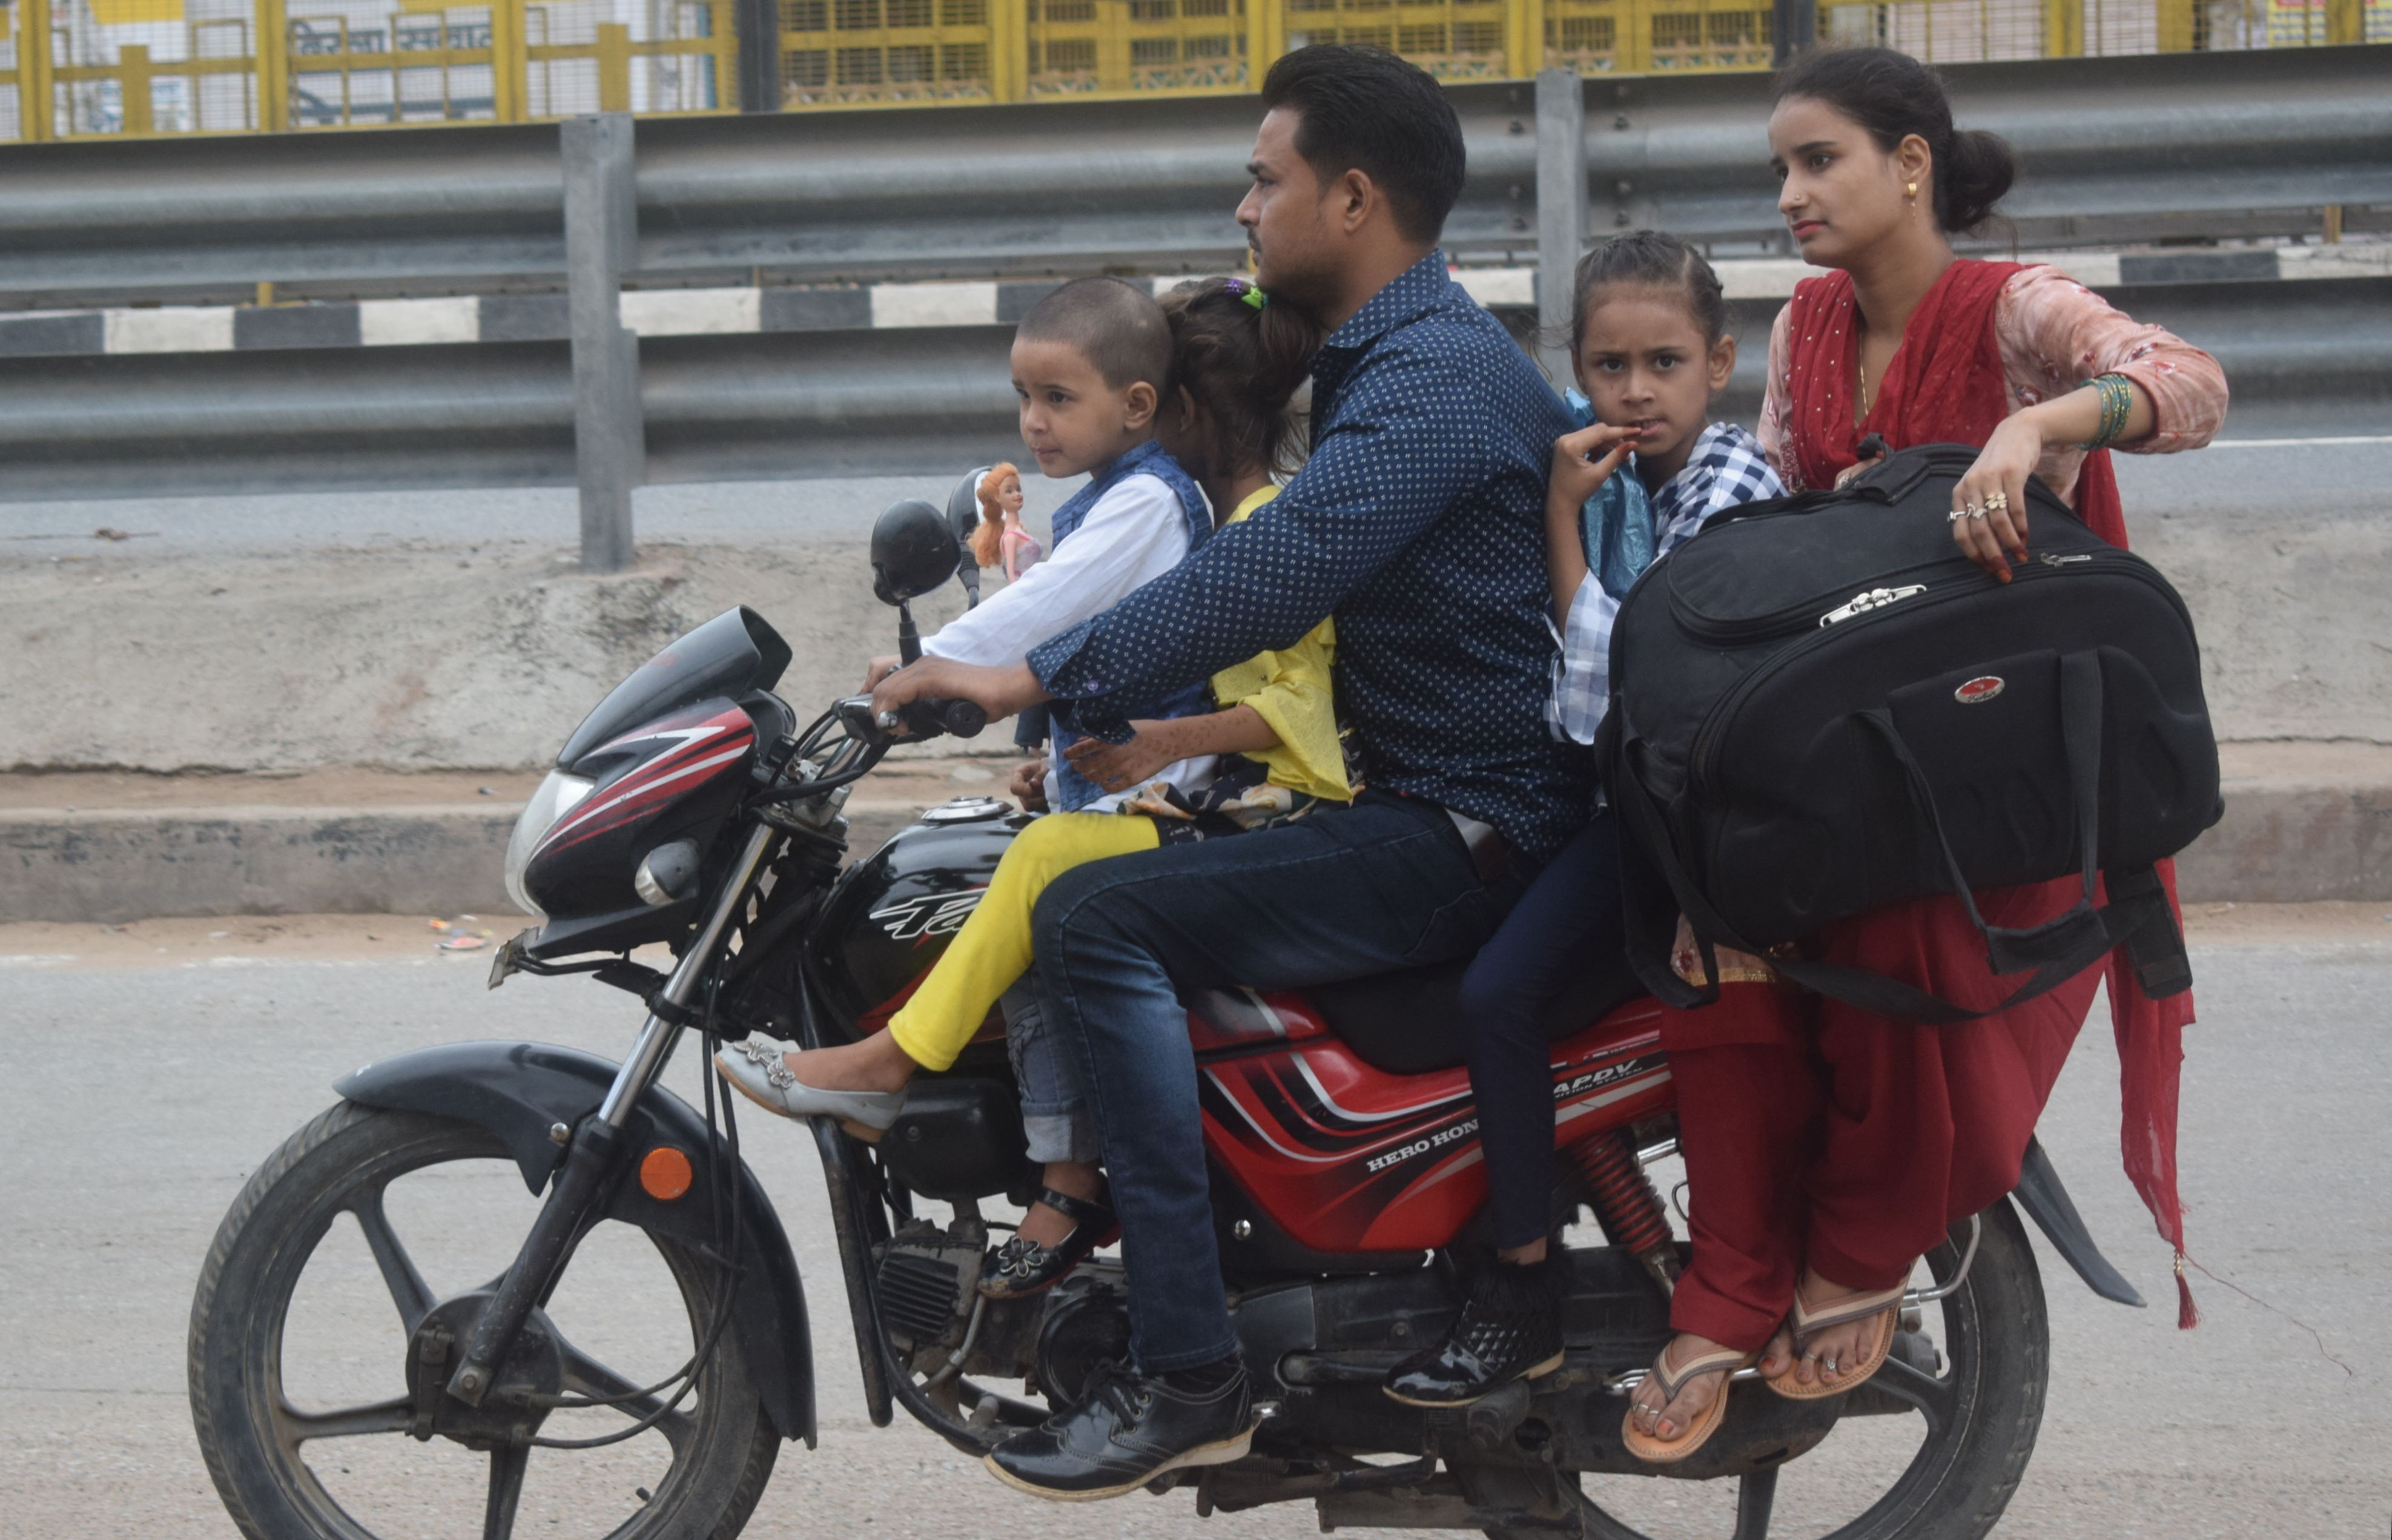 Govt issues new guidelines for safety of children riding on a motor cycle in MoRTH draft rules 